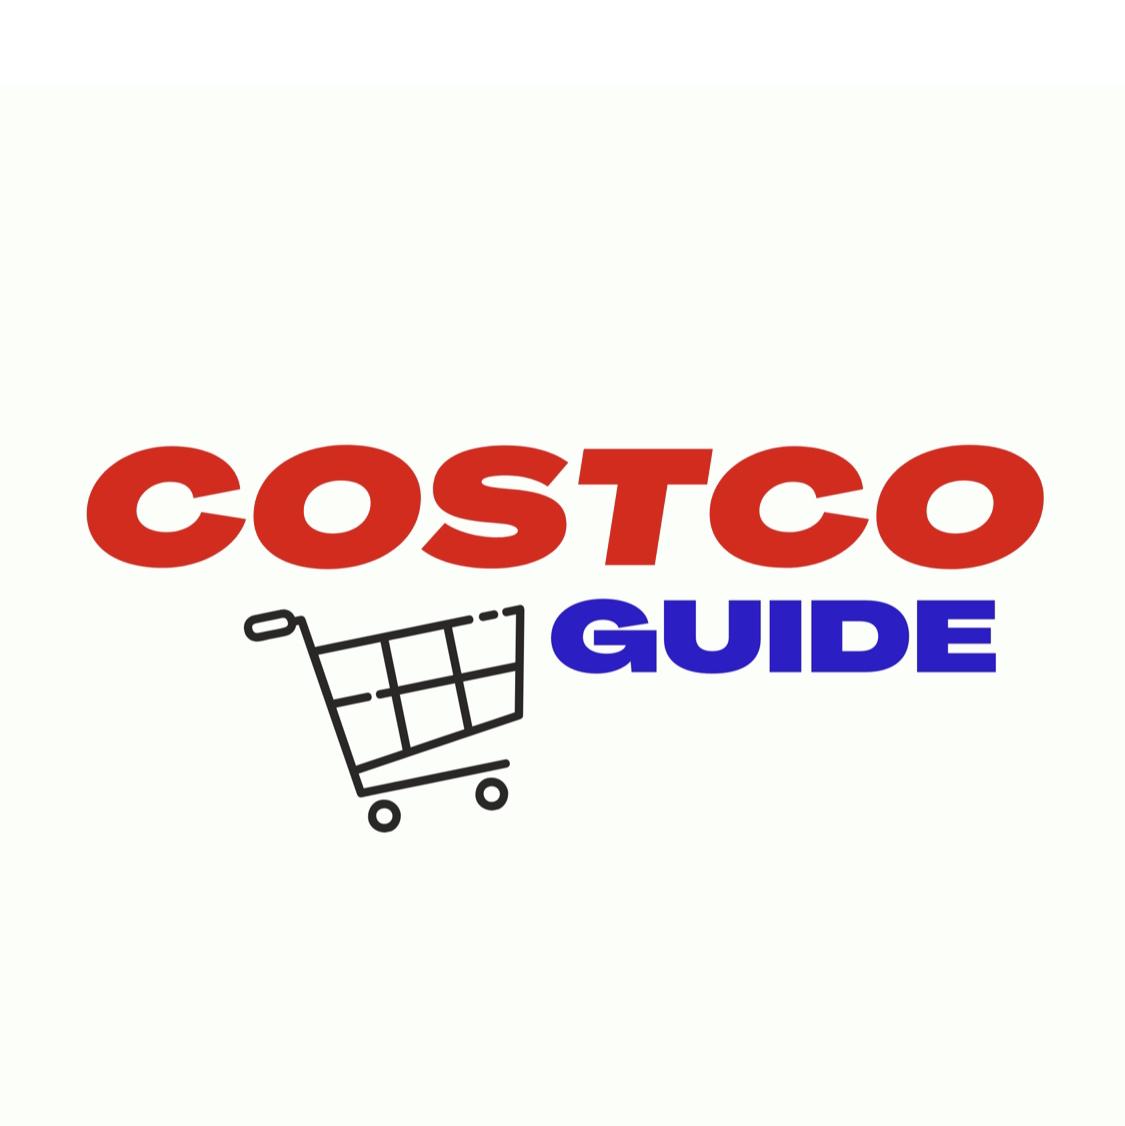 CostcoGuide's images